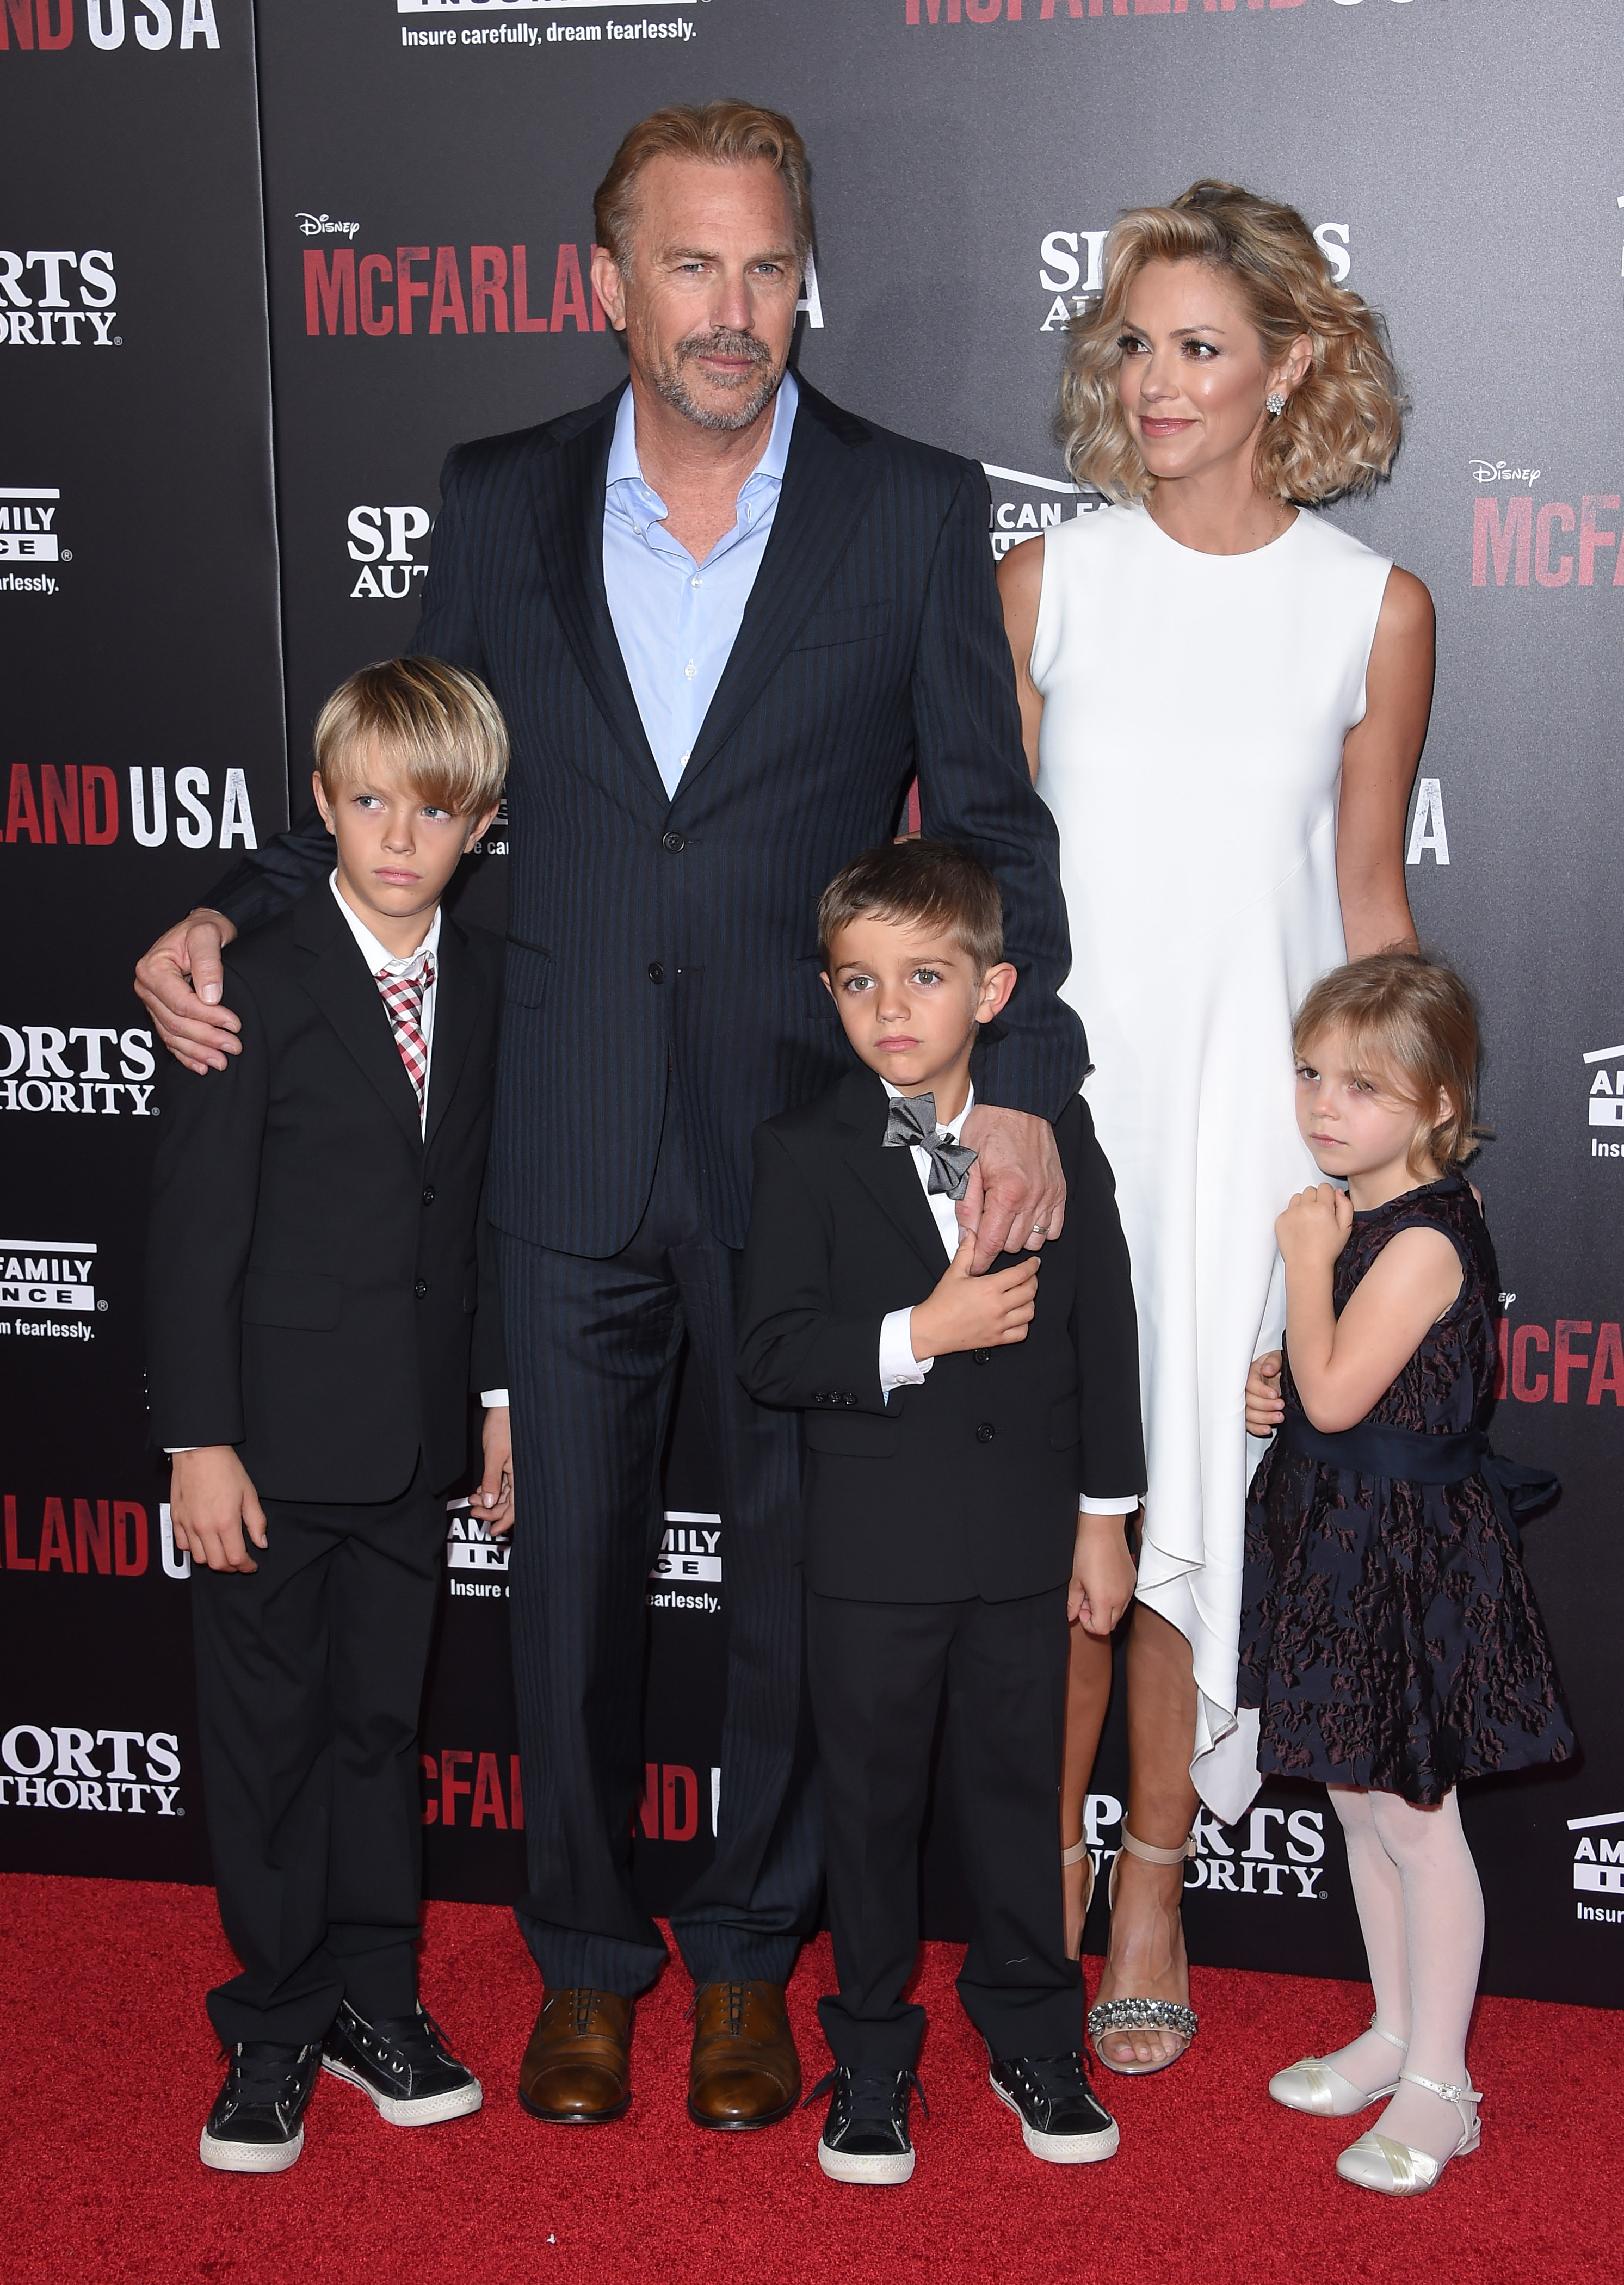 Kevin Costner, Christine Baumgartner and their children at the El Capitan Theater on February 9, 2015, in Hollywood, Calif. | Source: Getty Images